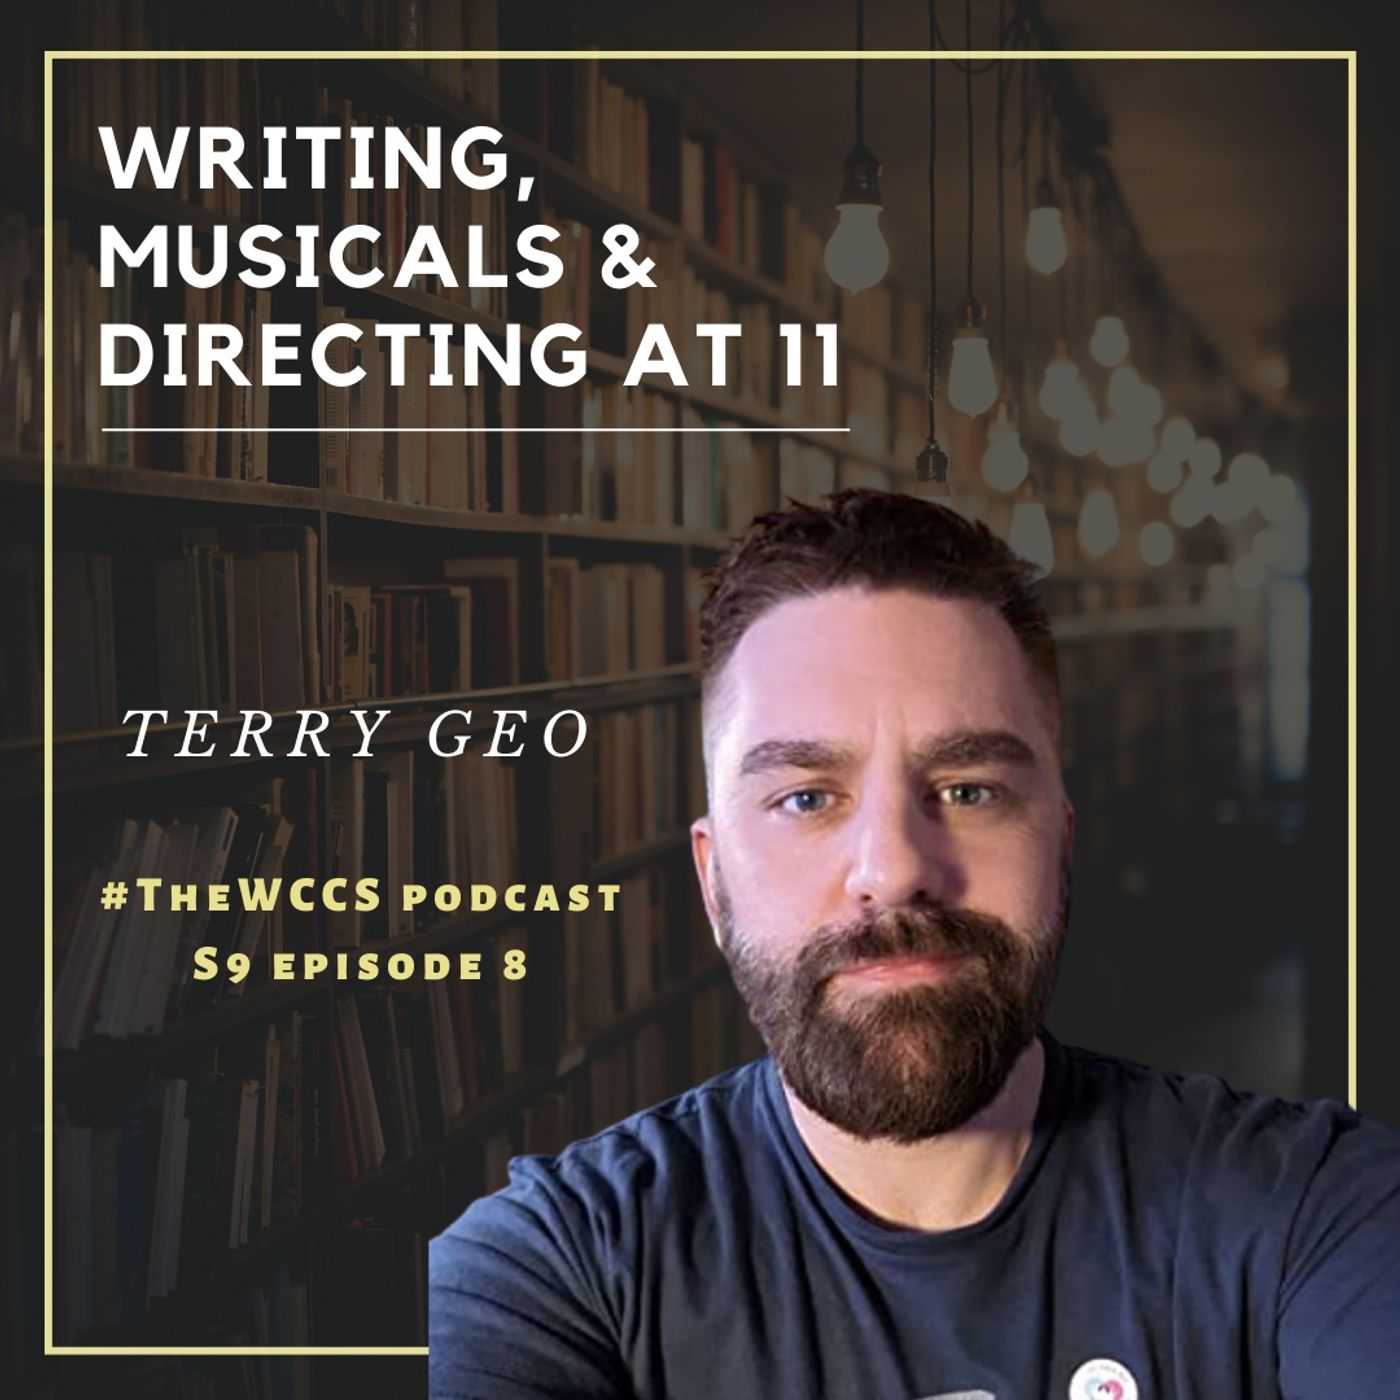 Writing, musicals & directing at 11, with Terry Geo.